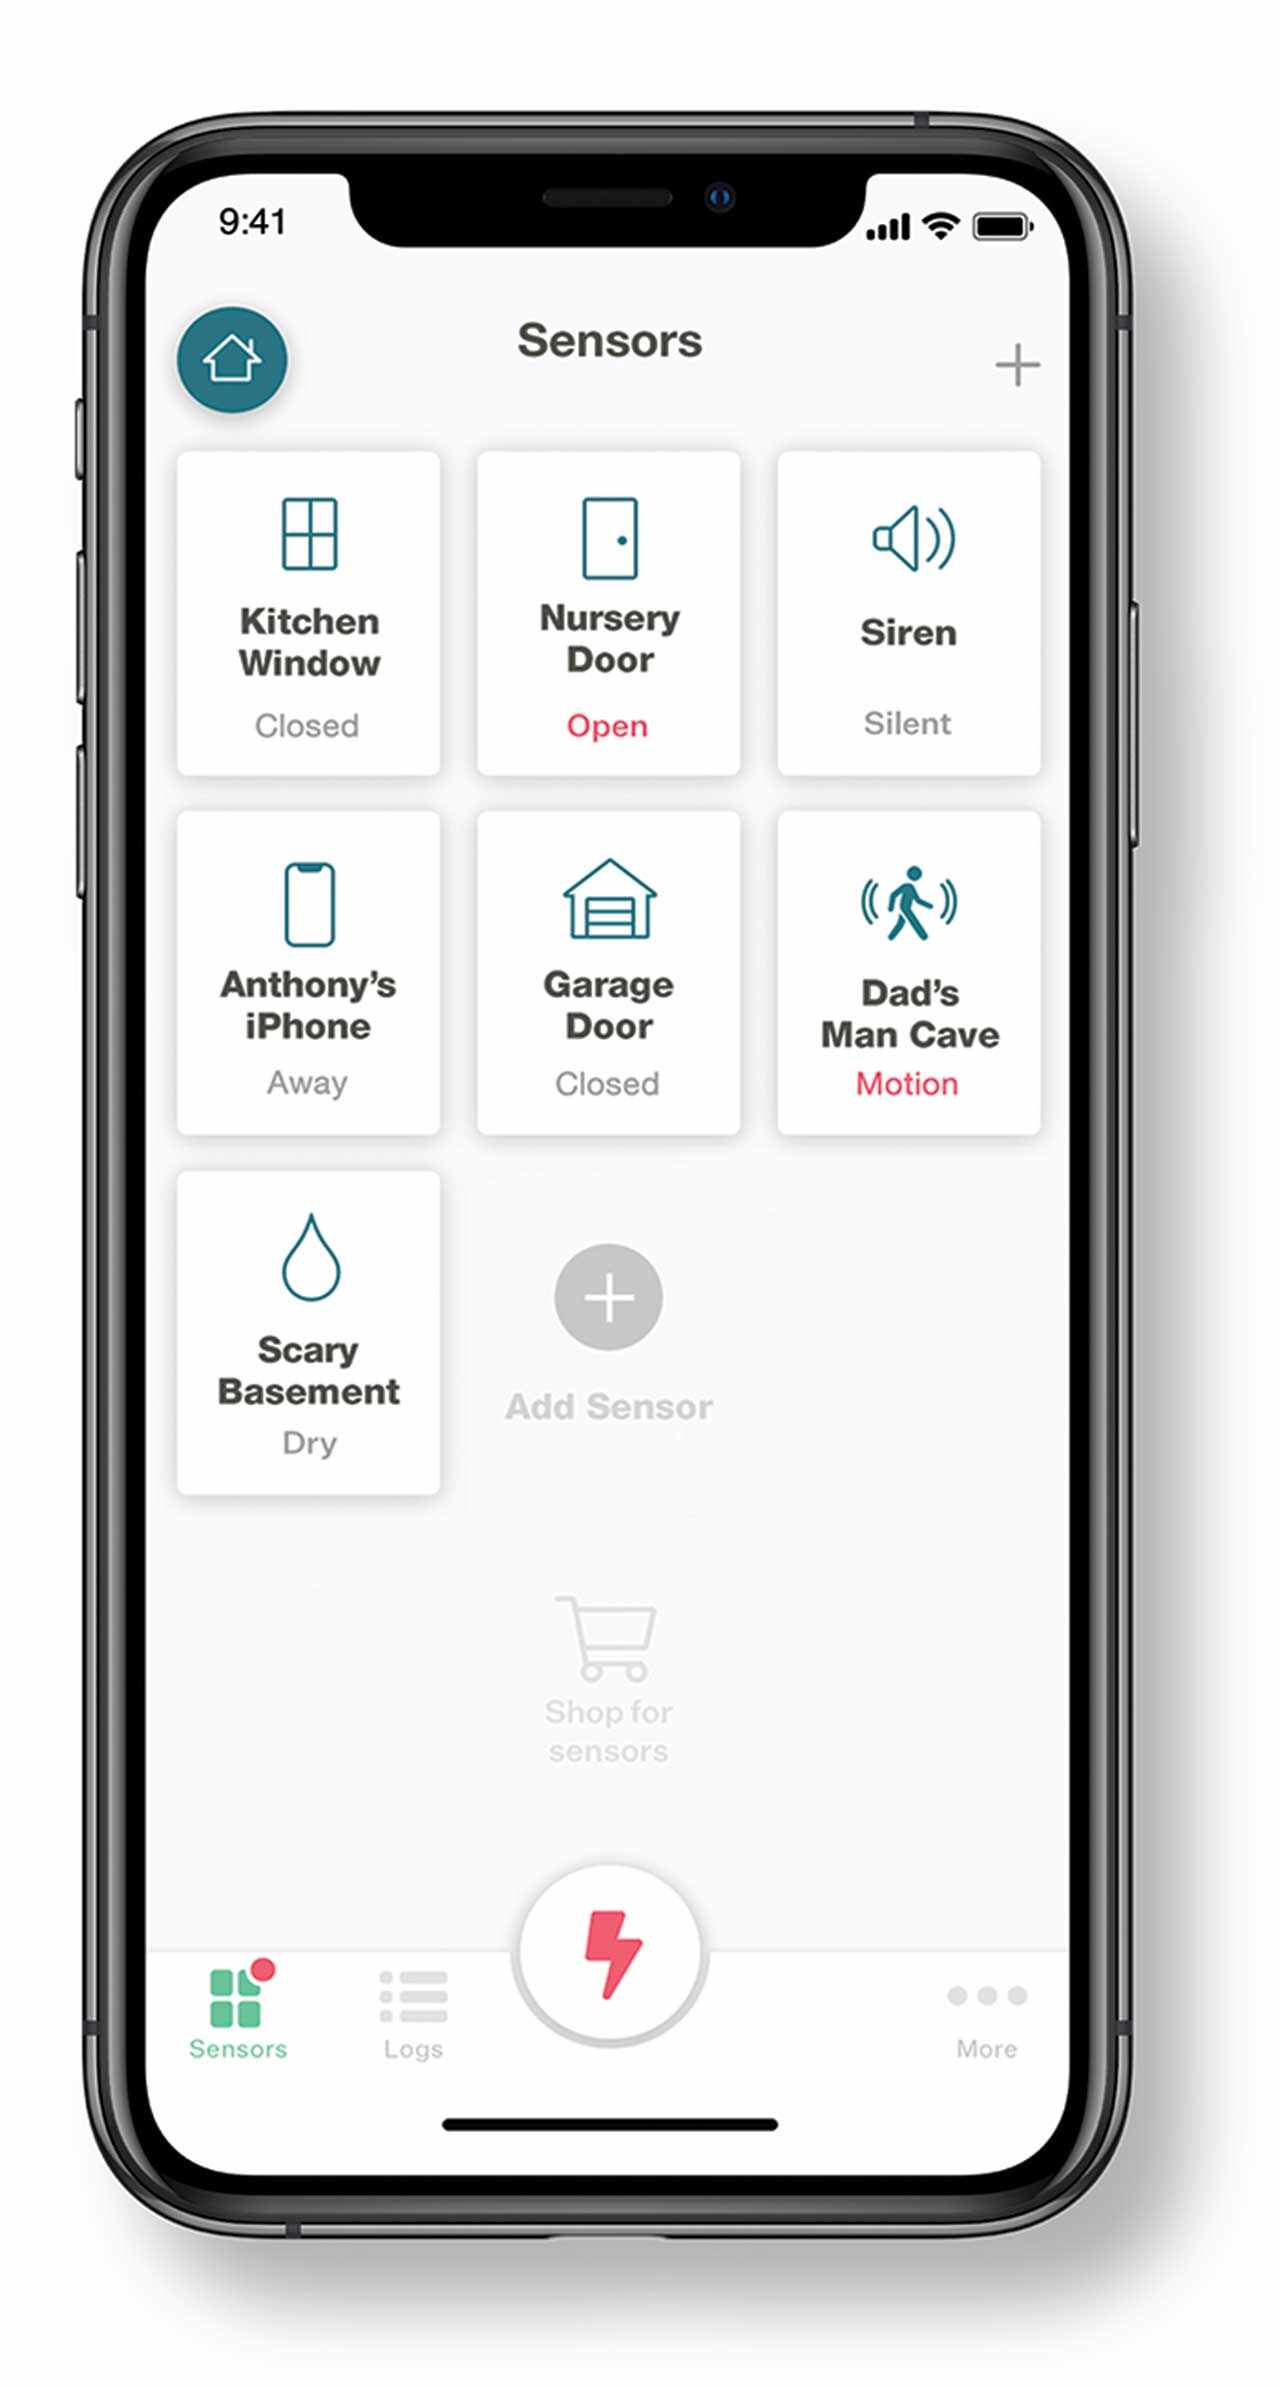 Mobile app for do it yourself security system.